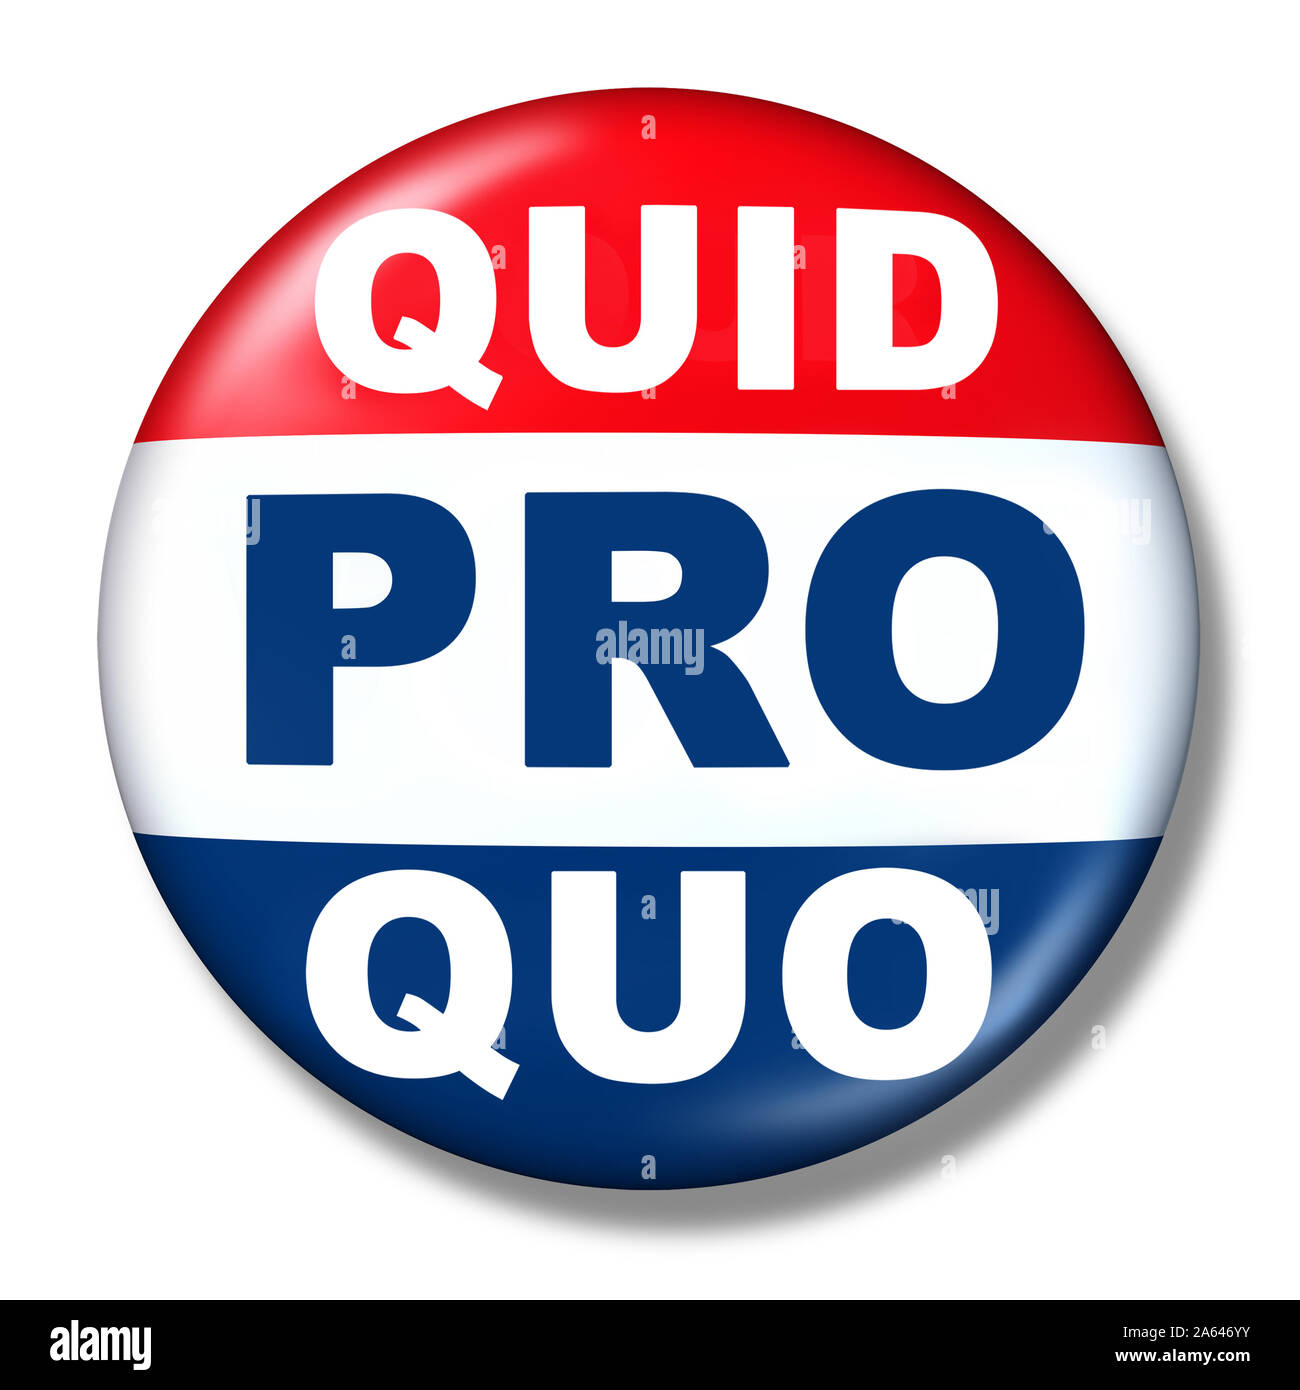 Quid pro quo as a business transaction or unethical political action in giving something for a favour as an exchange or transfer of services. Stock Photo